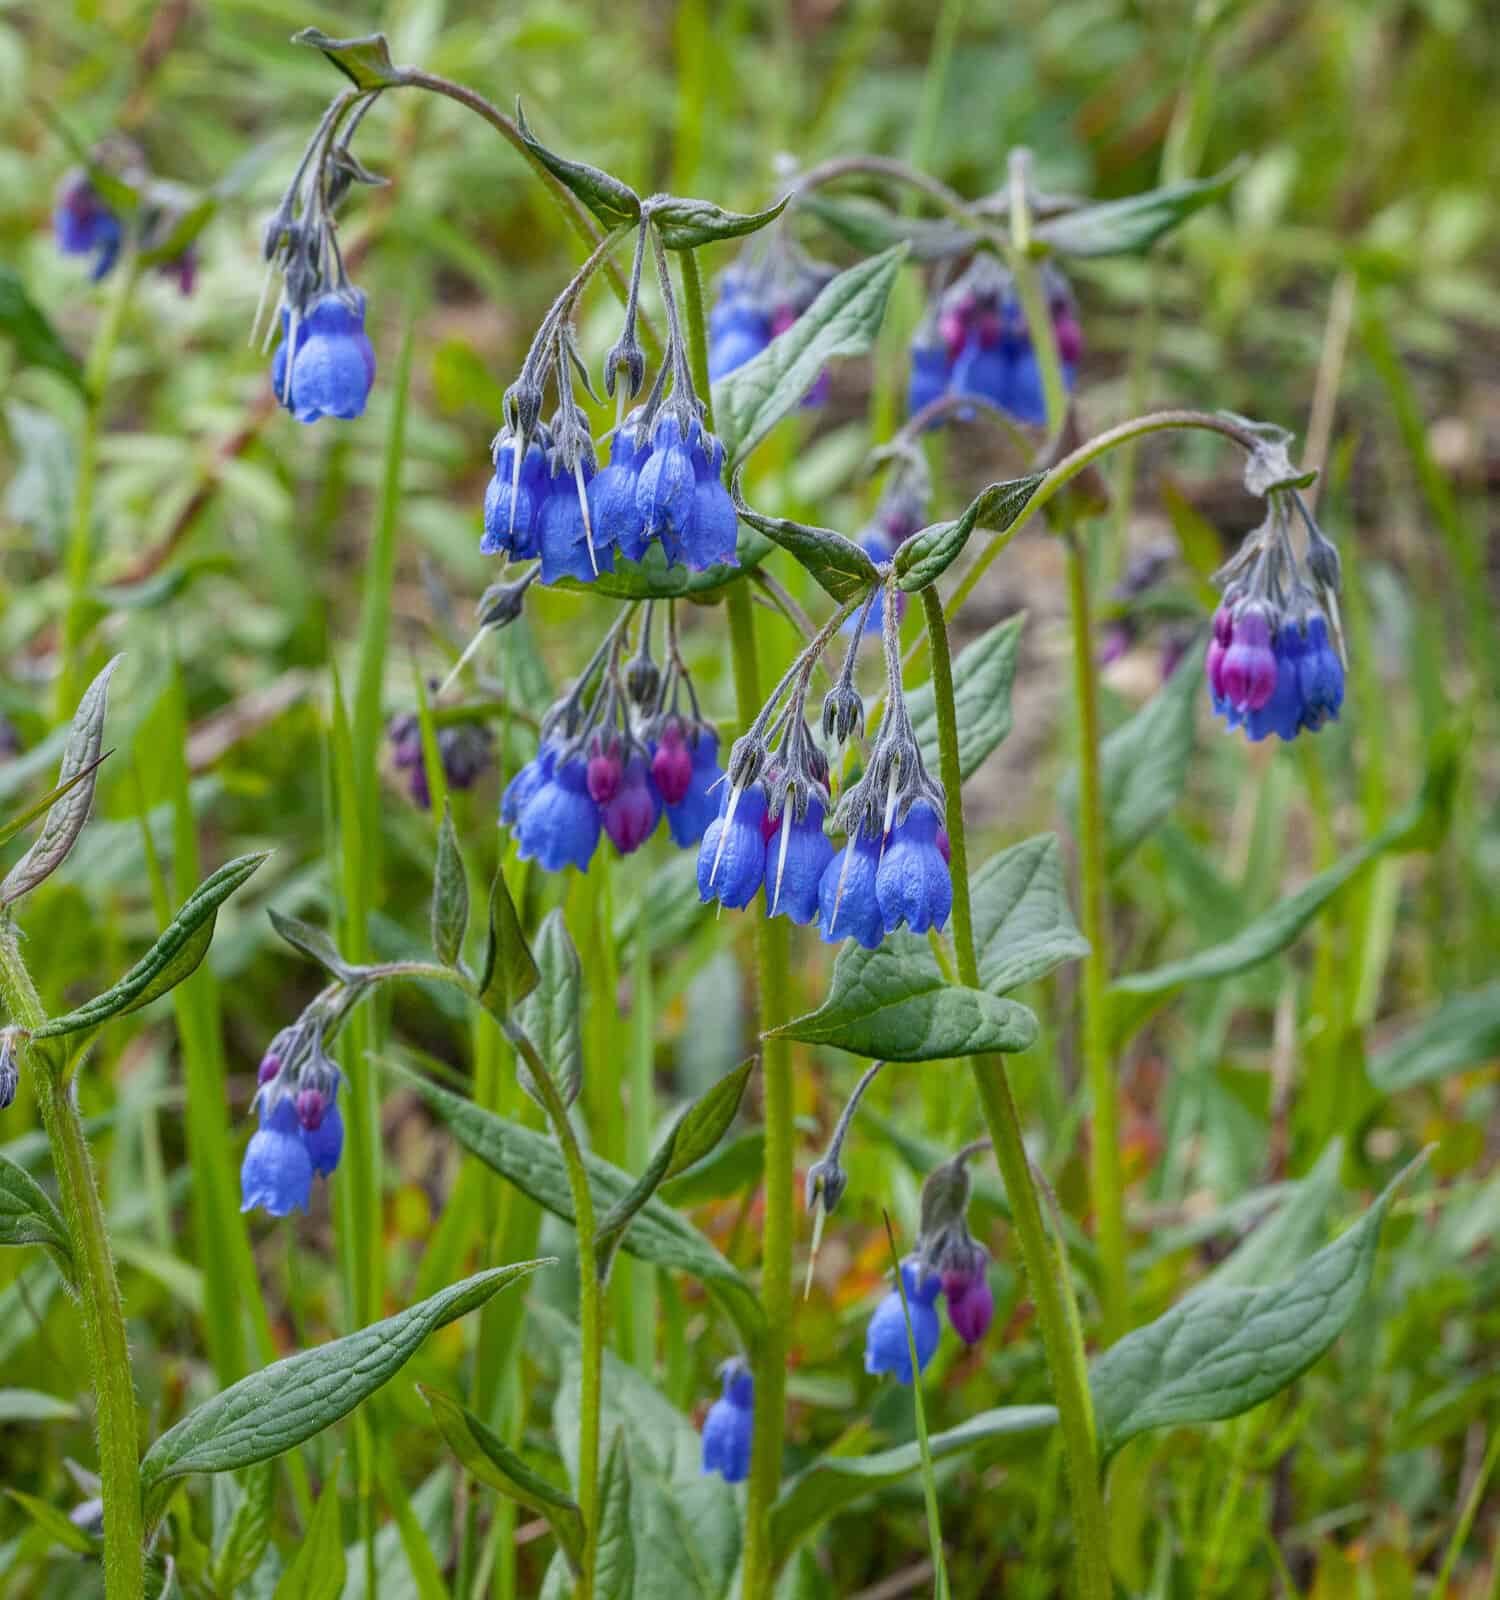 A group of beautiful Tall Bluebell Flowers (Mertensia paniculata) blooming in Nome, Alaska